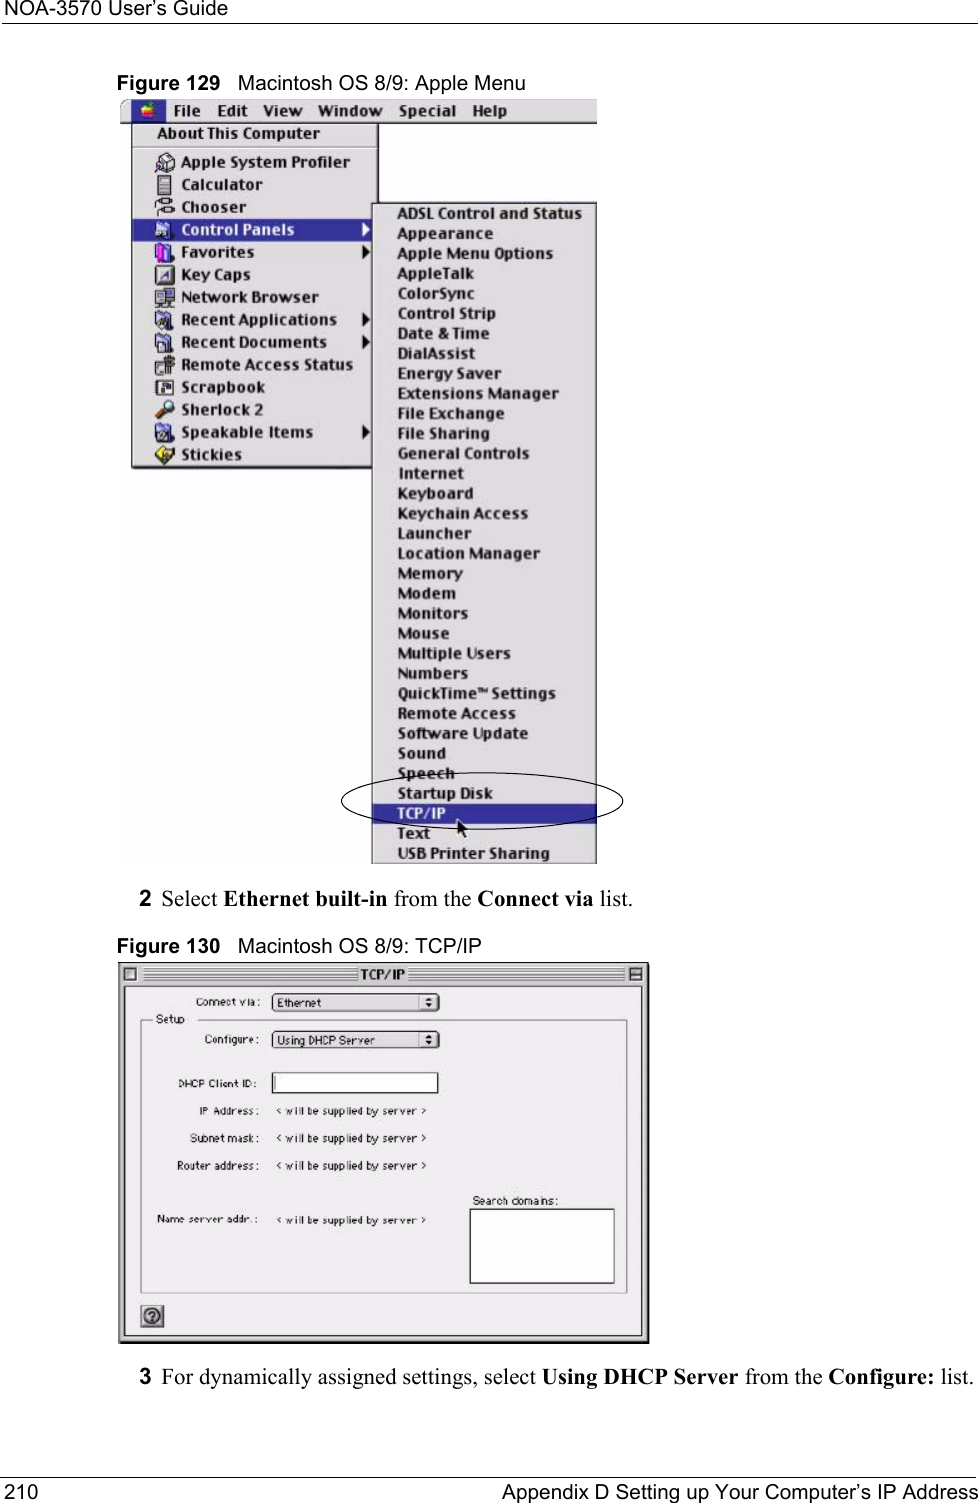 NOA-3570 User’s Guide210 Appendix D Setting up Your Computer’s IP AddressFigure 129   Macintosh OS 8/9: Apple Menu2Select Ethernet built-in from the Connect via list.Figure 130   Macintosh OS 8/9: TCP/IP3For dynamically assigned settings, select Using DHCP Server from the Configure: list.